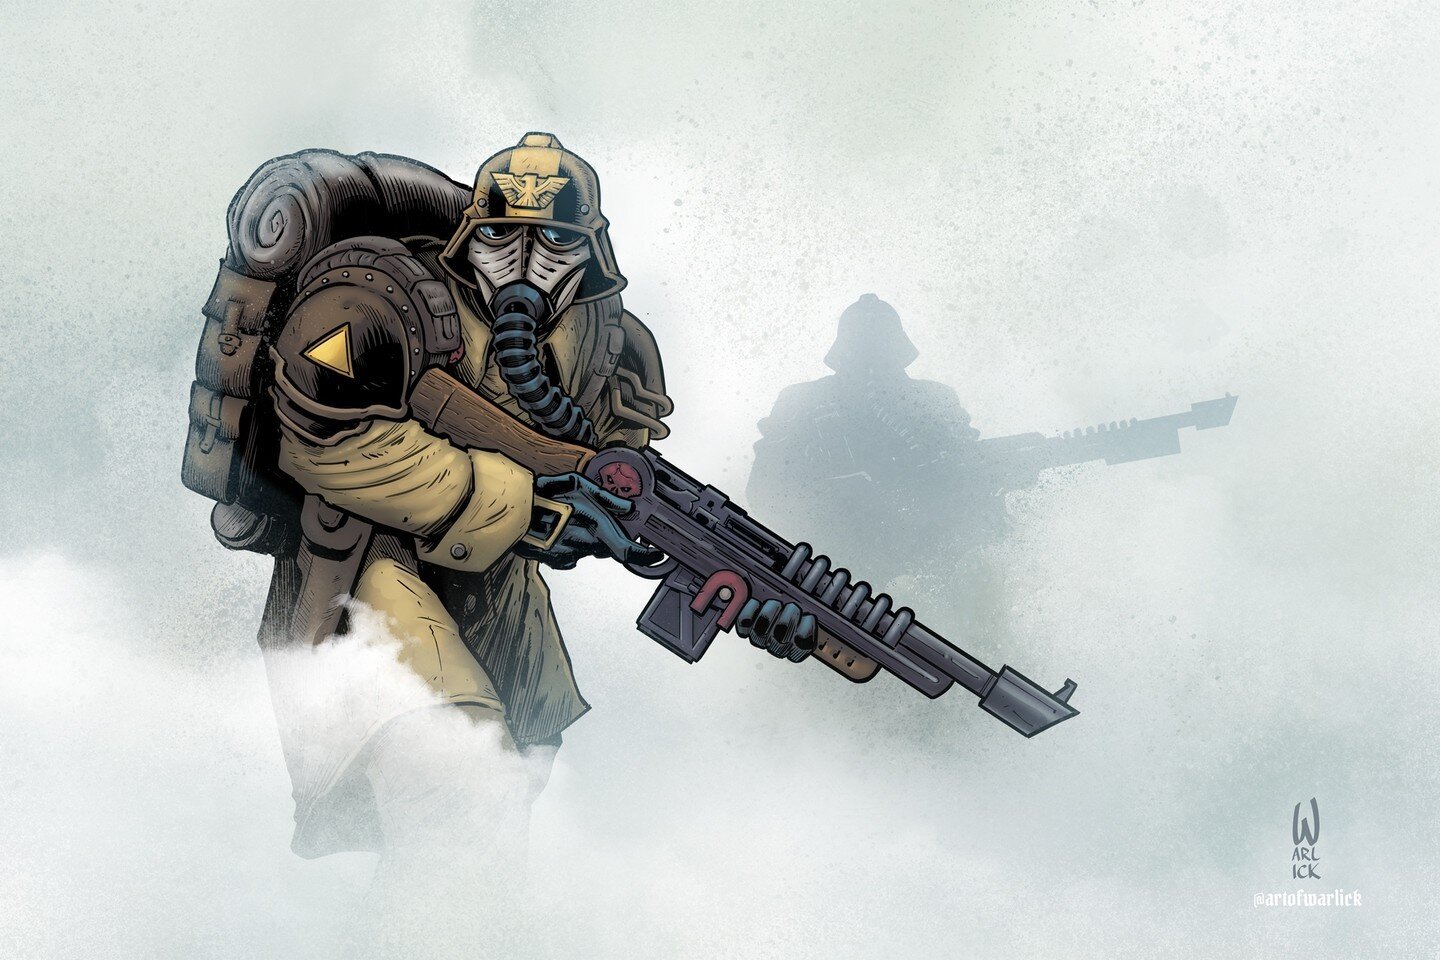 Attention all Warhammer 40K fans! Check out my latest commission &ndash; an illustration of a fan&rsquo;s custom #DeathKorps Trooper stalking heretics through alien fog. ⁠
⁠
Follow me for more sci-fi and fantasy art and let me know in the comments wh